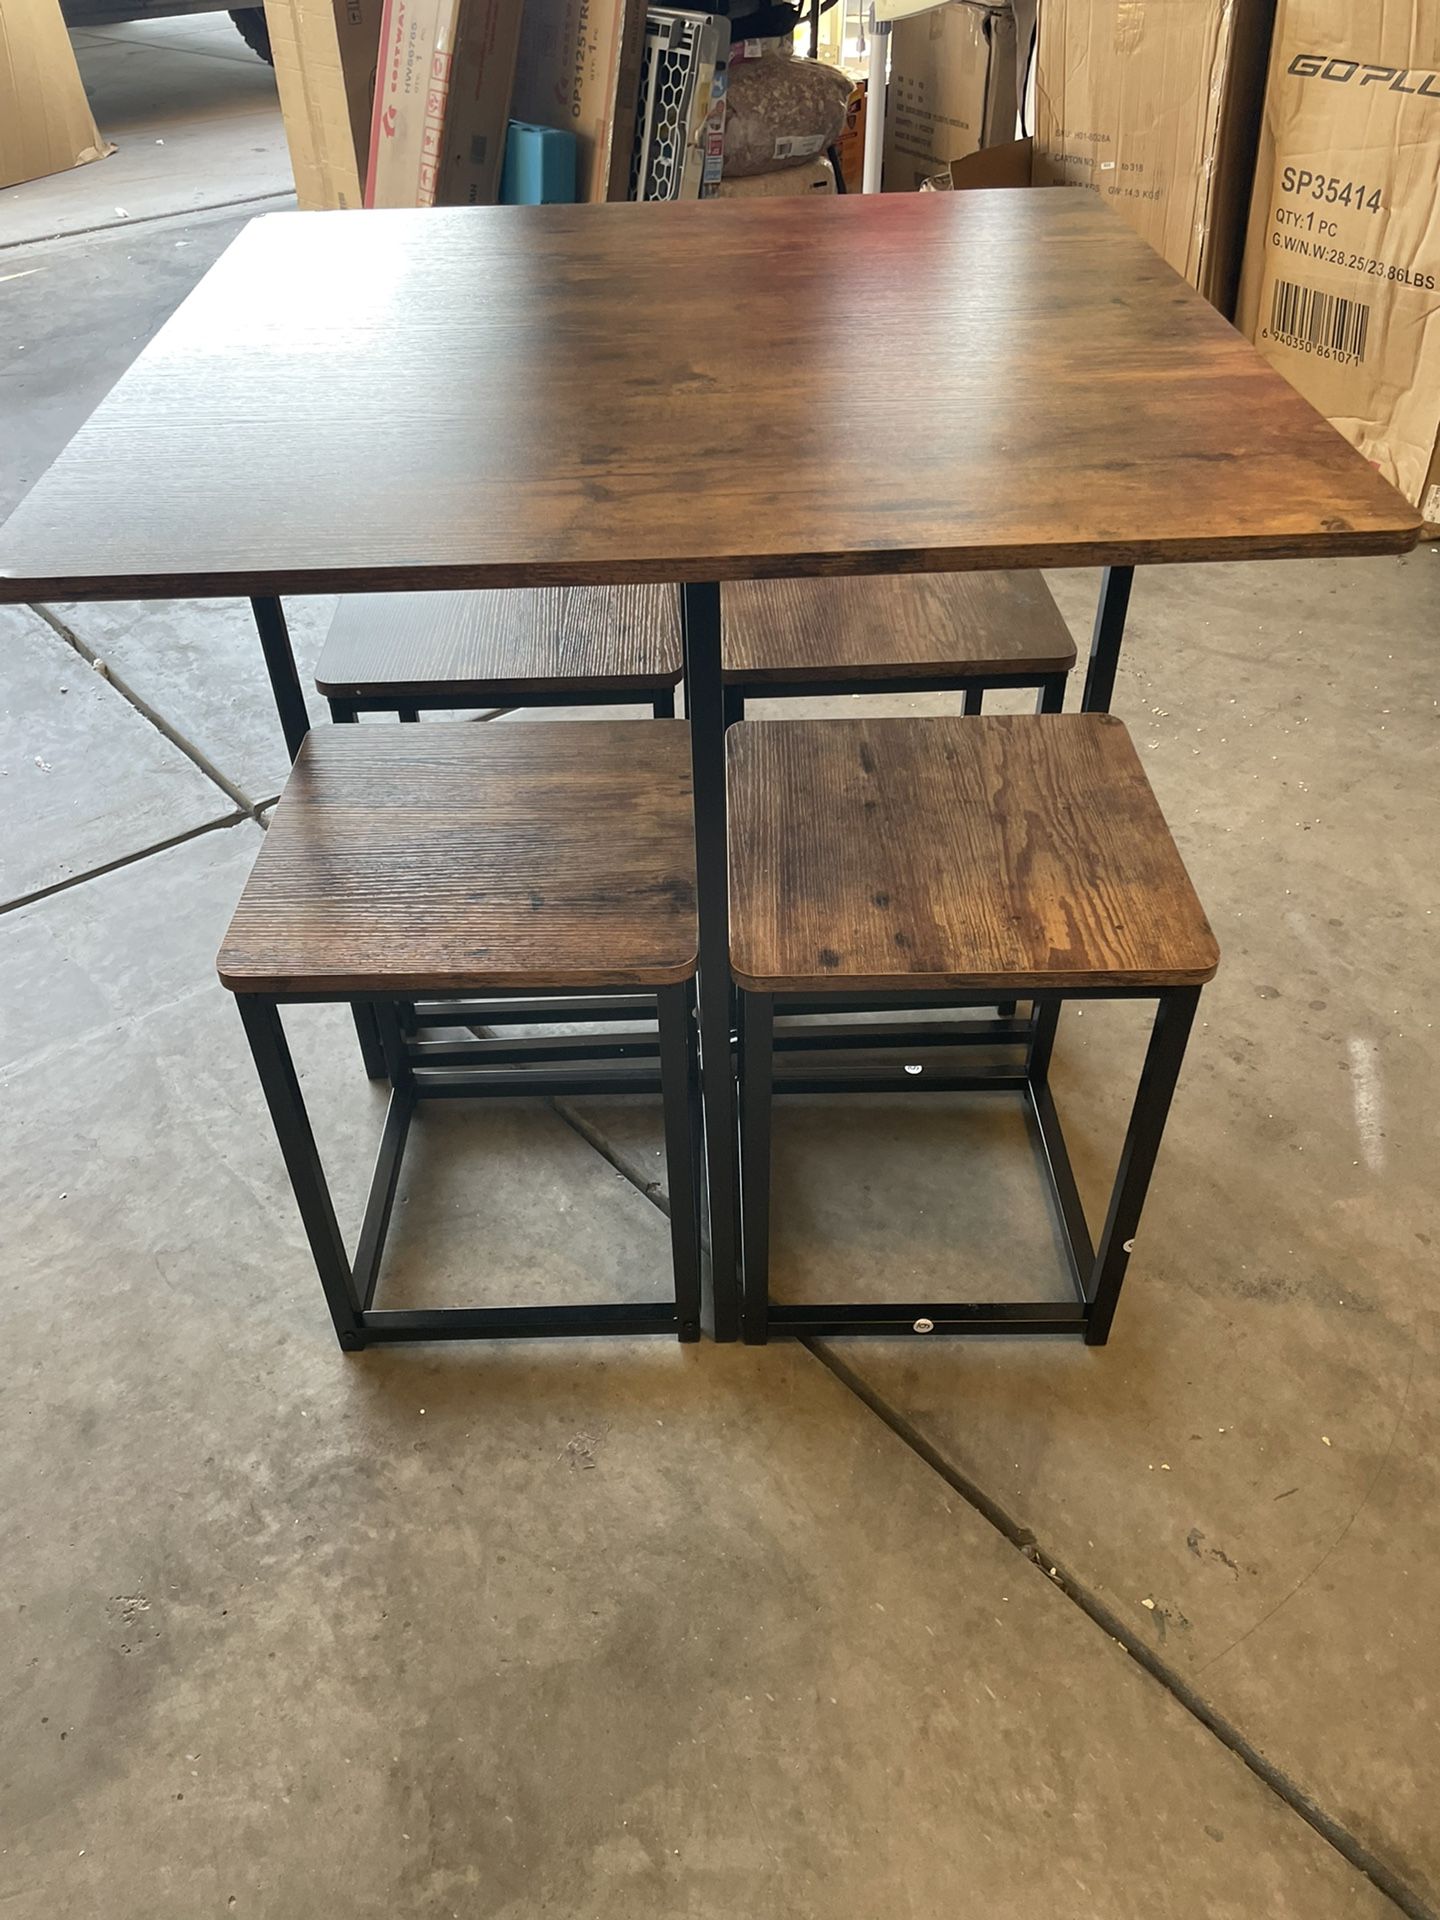 5 Piece Metal Frame Table 4 Stools 